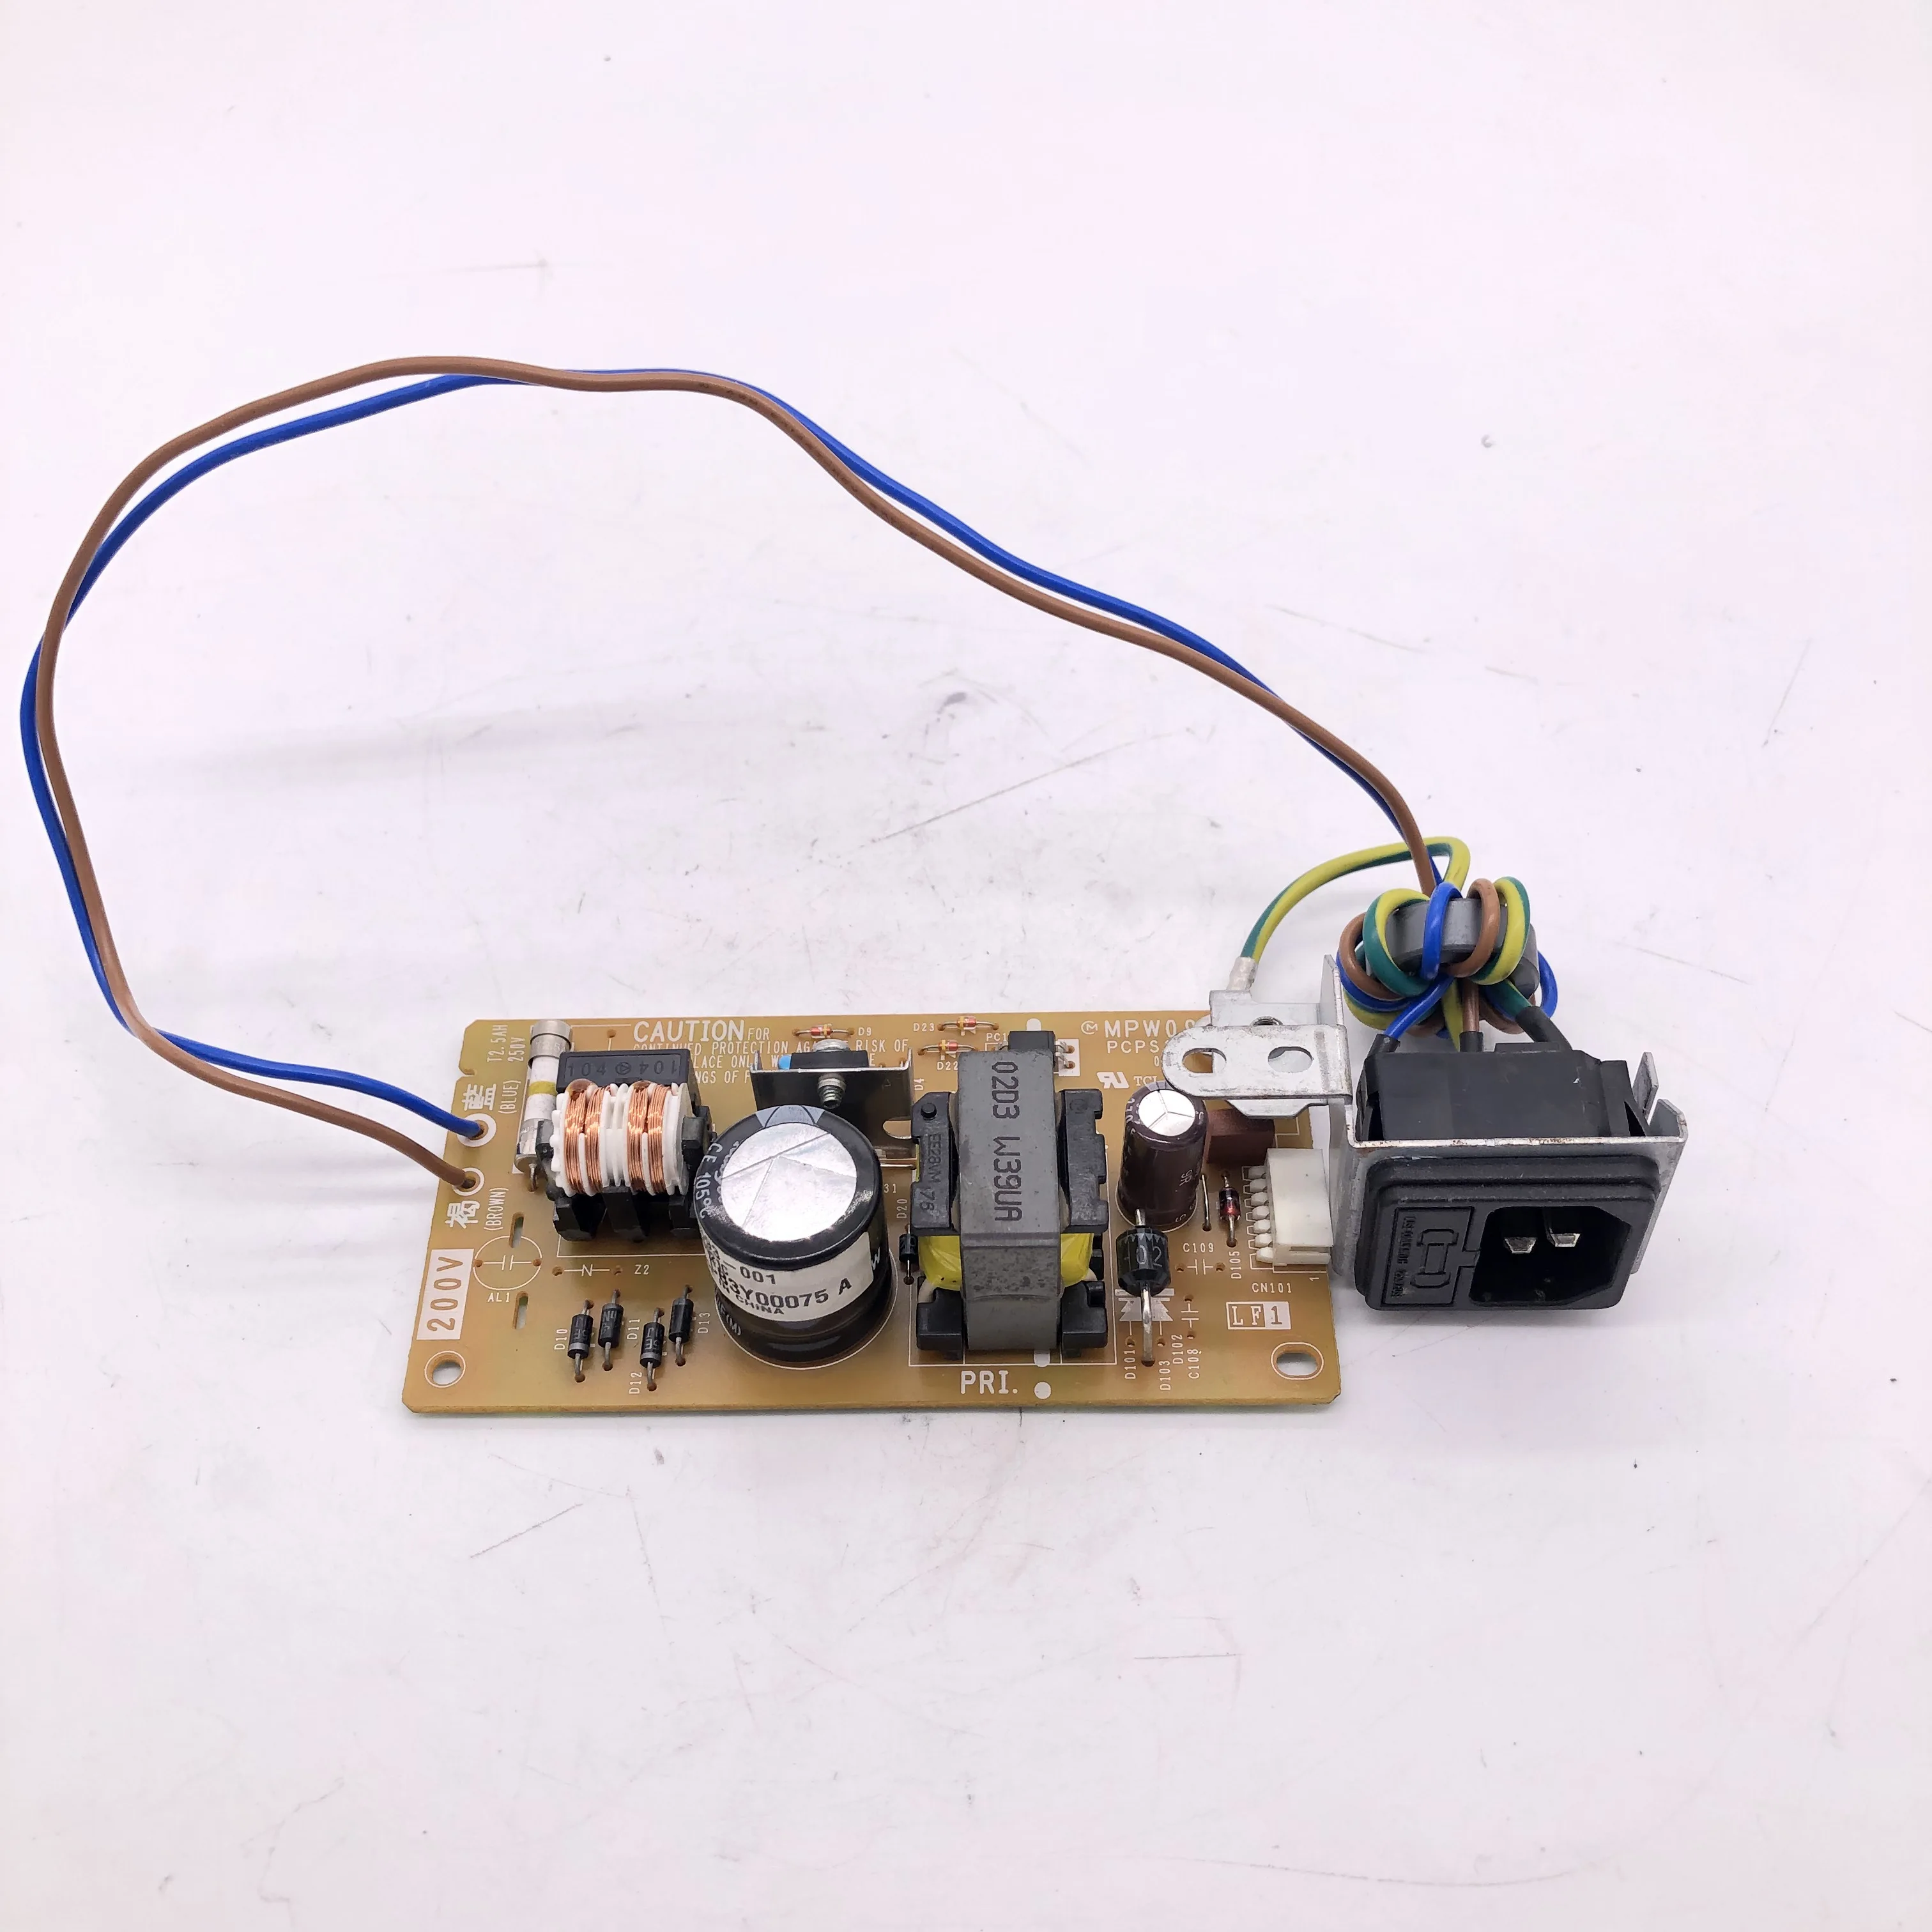 Power supply board J5910DW 200V fits for BROTHER MFC-J5910DW MFC-J6710 Mfc-J6910Cdw J6710 J6910DW J6510DW J6510 J6710DW